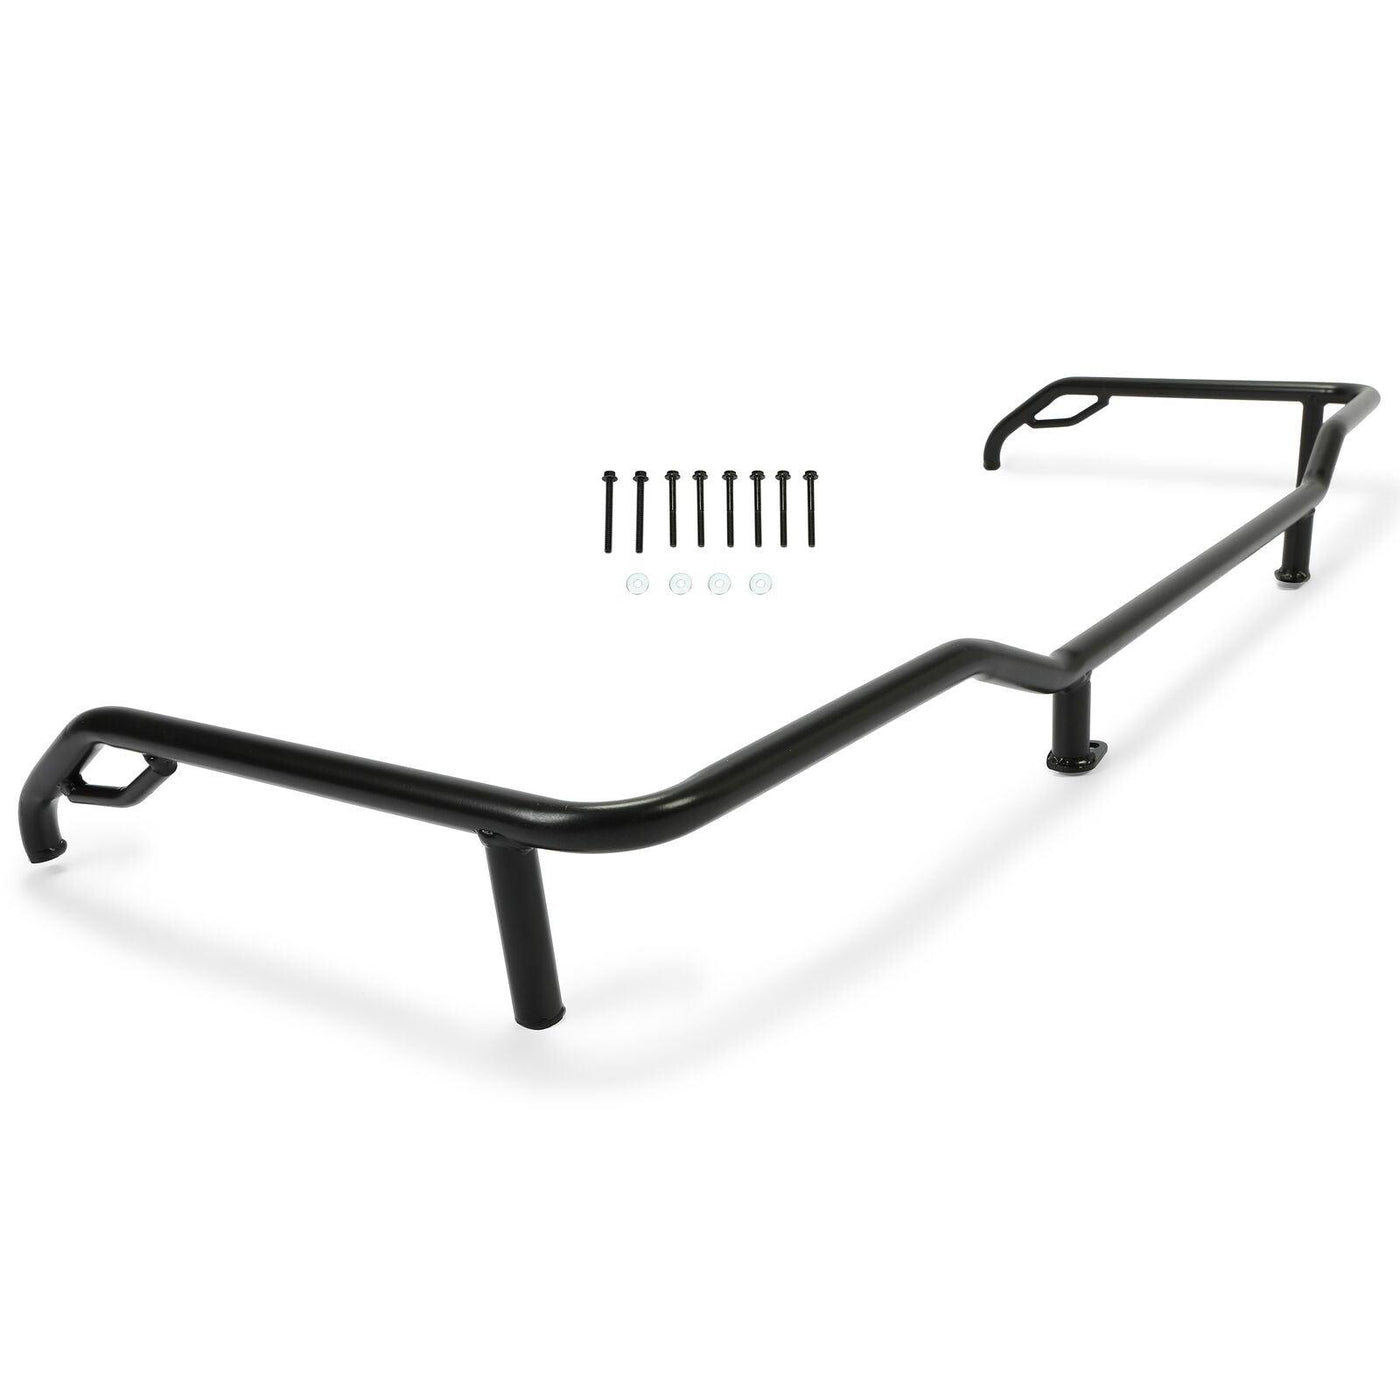 For 2014-2020 Polaris Sportsman 570 450 Rear Steel Rack Extender 2879717 - Moto Life Products